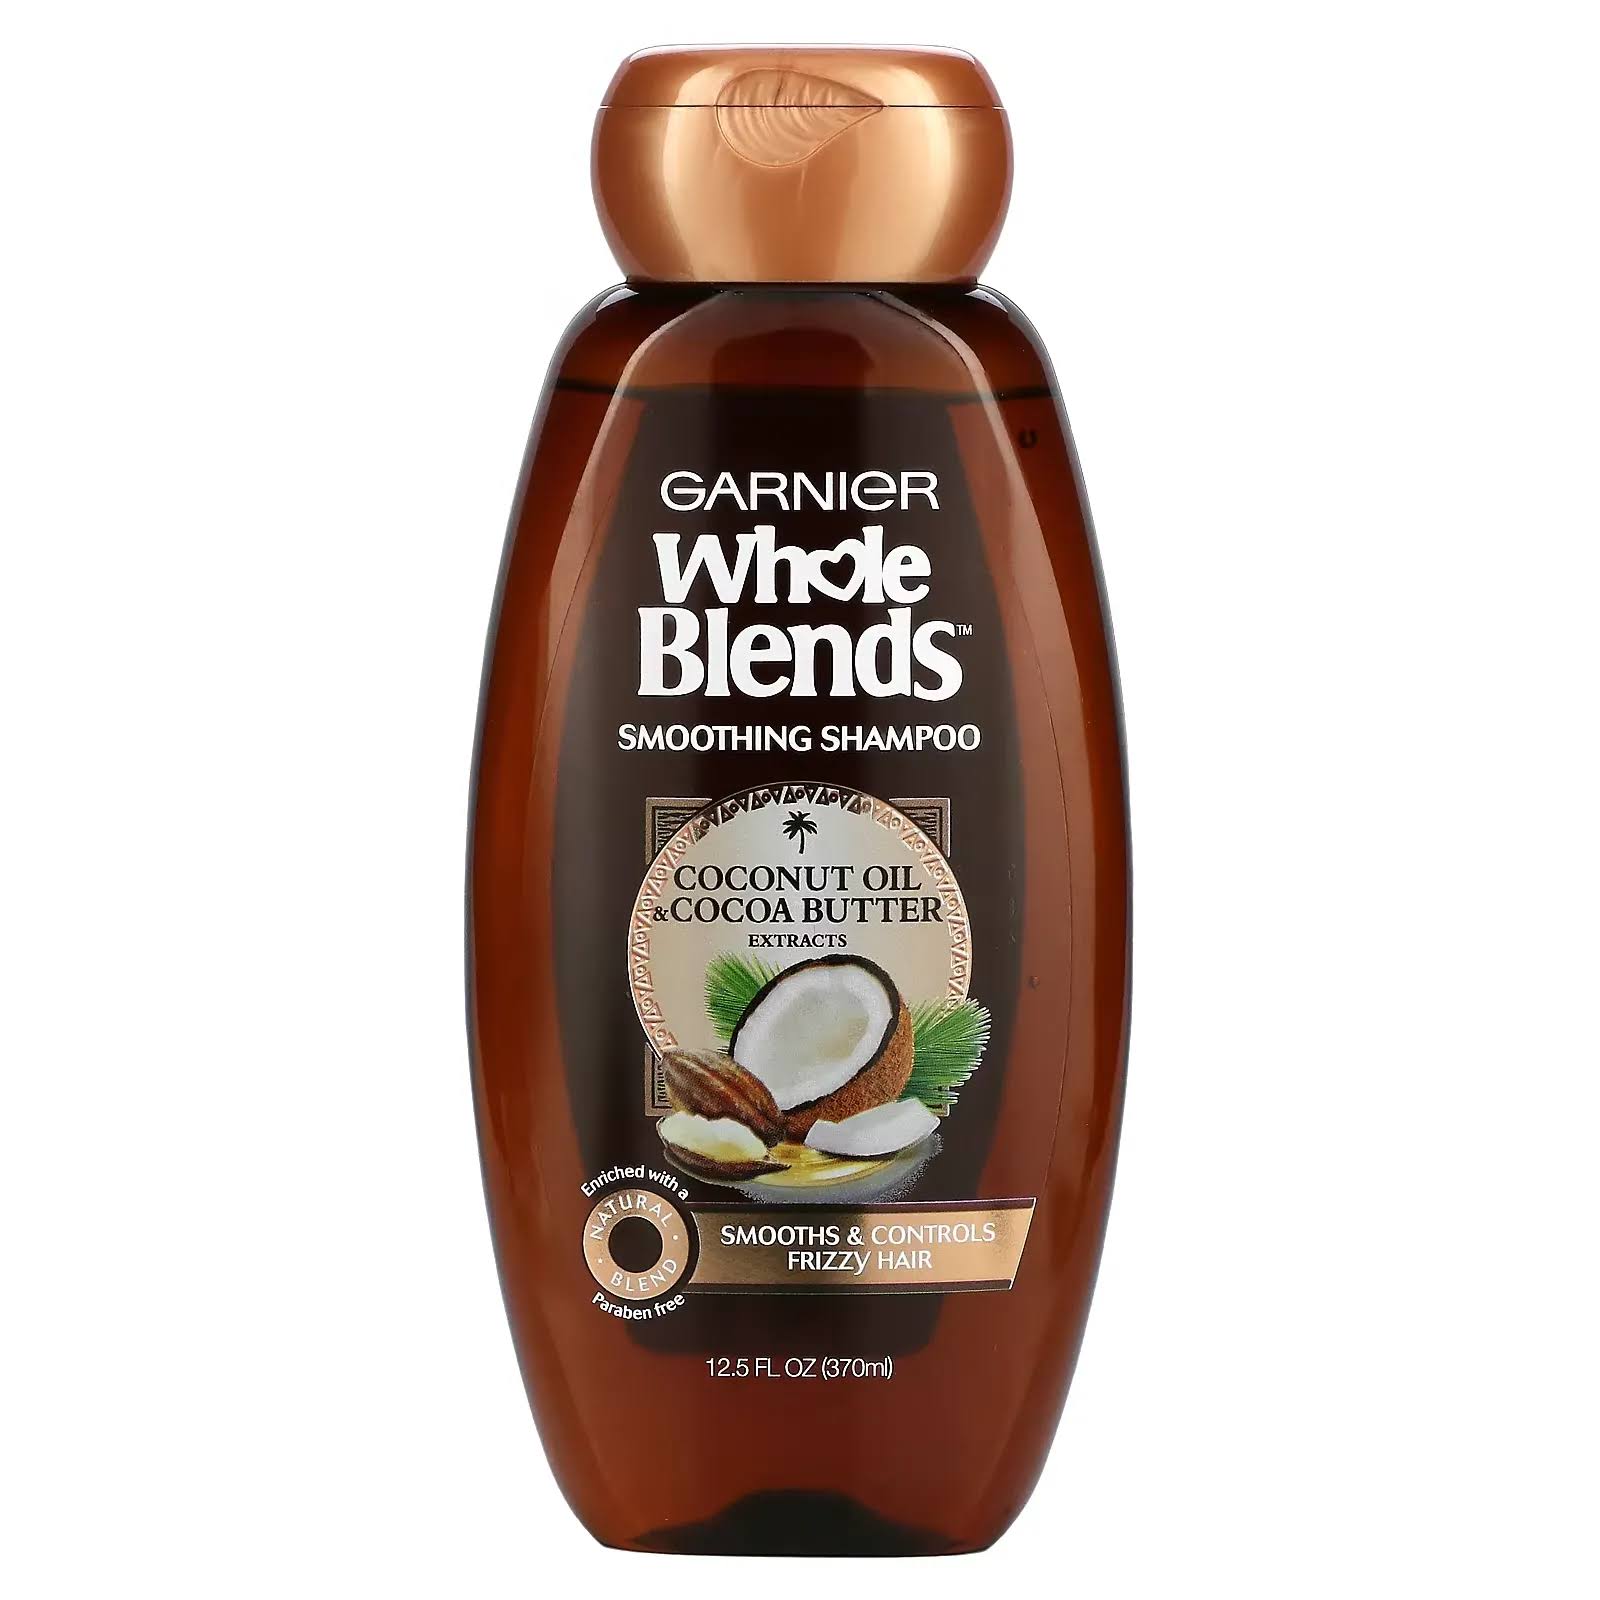 Garnier Whole Blends Smoothing Shampoo - Coconut Oil & Cocoa Butter, 370ml